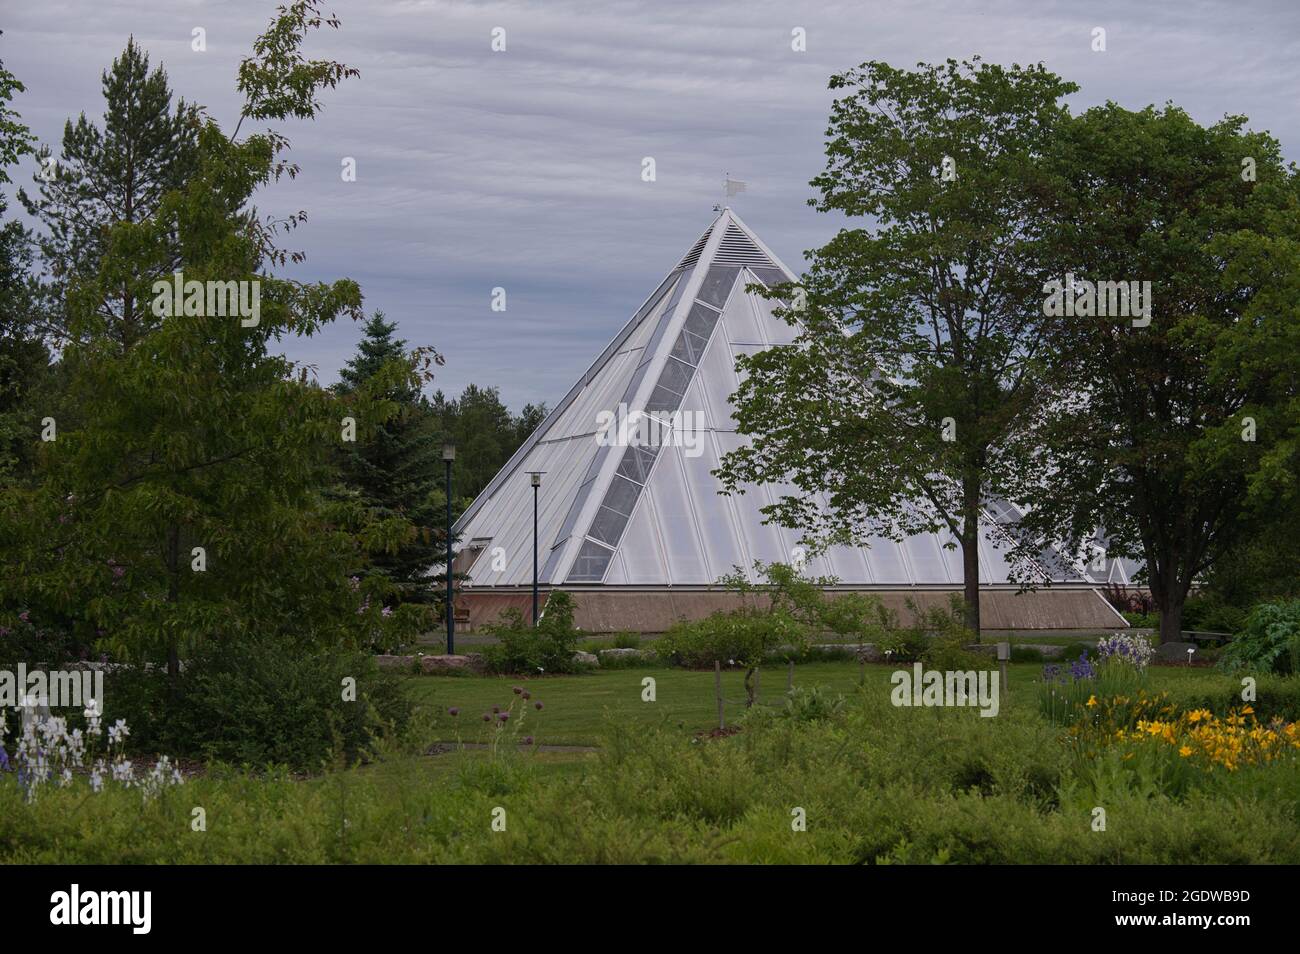 Pyramid shaped greenhouse in Oulu Botanical Garden, Finland Stock Photo